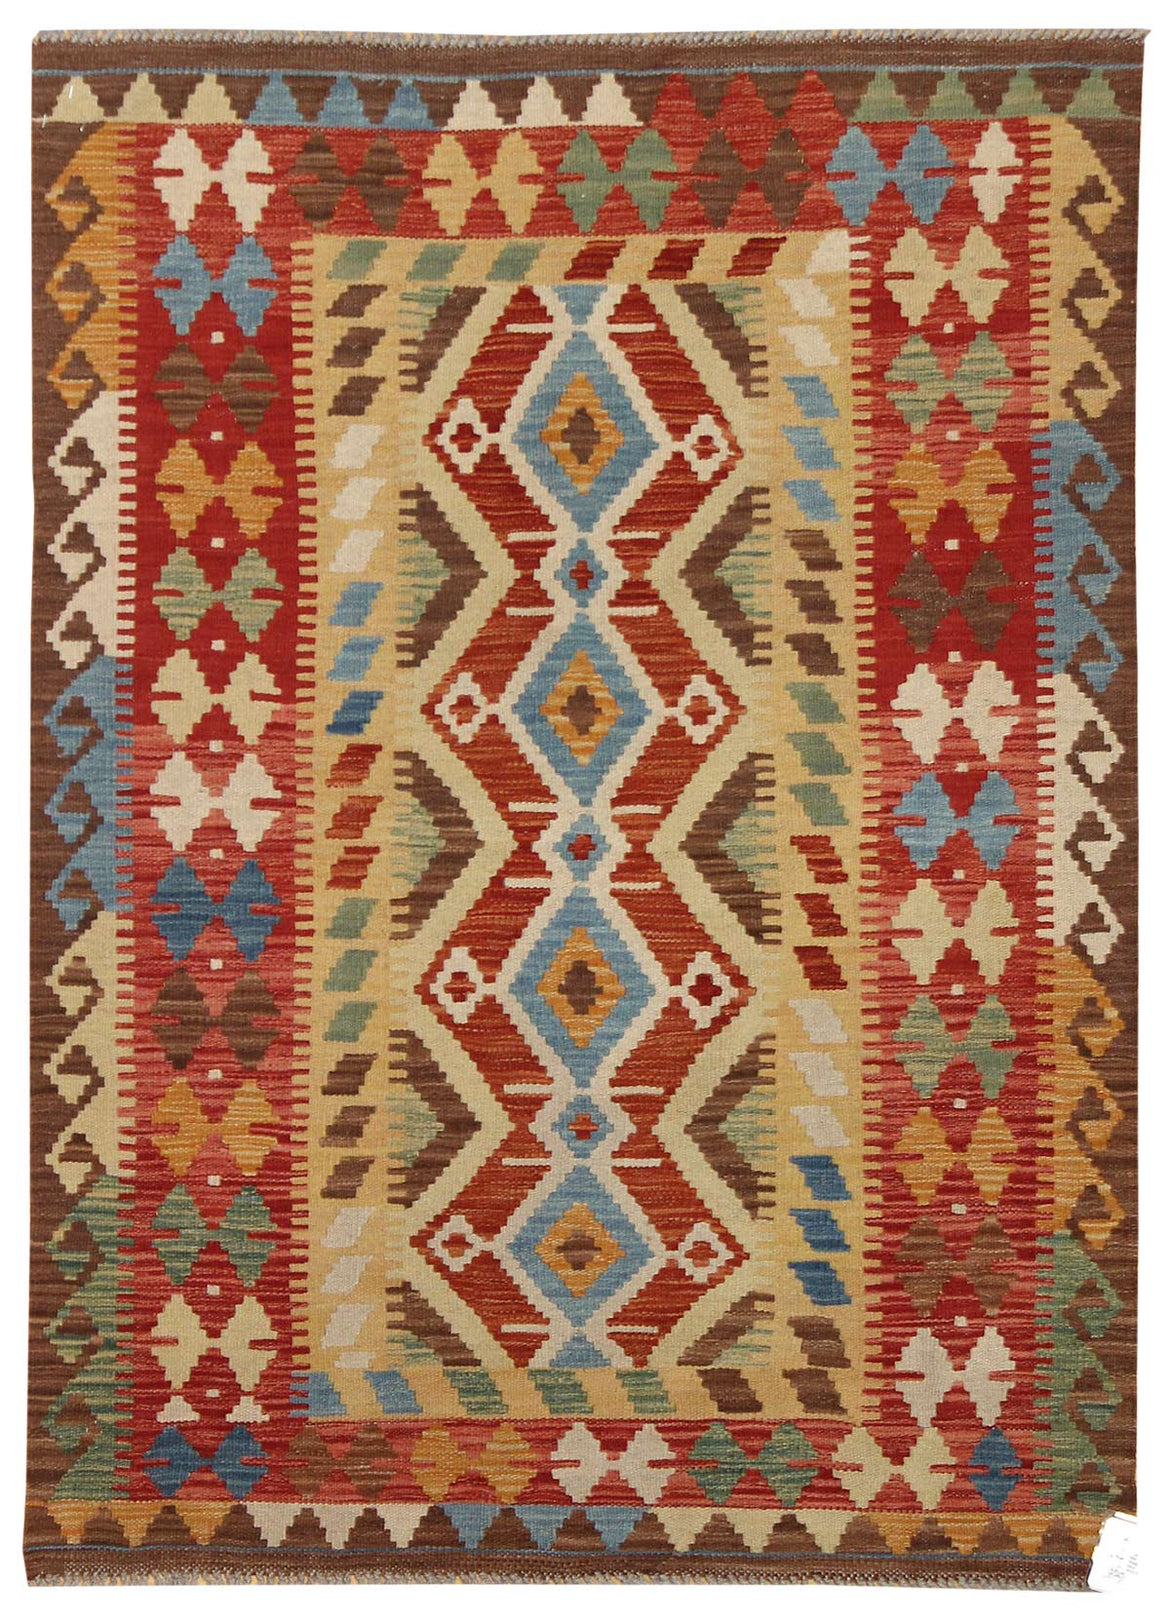 The Beauty of Kilim Rugs